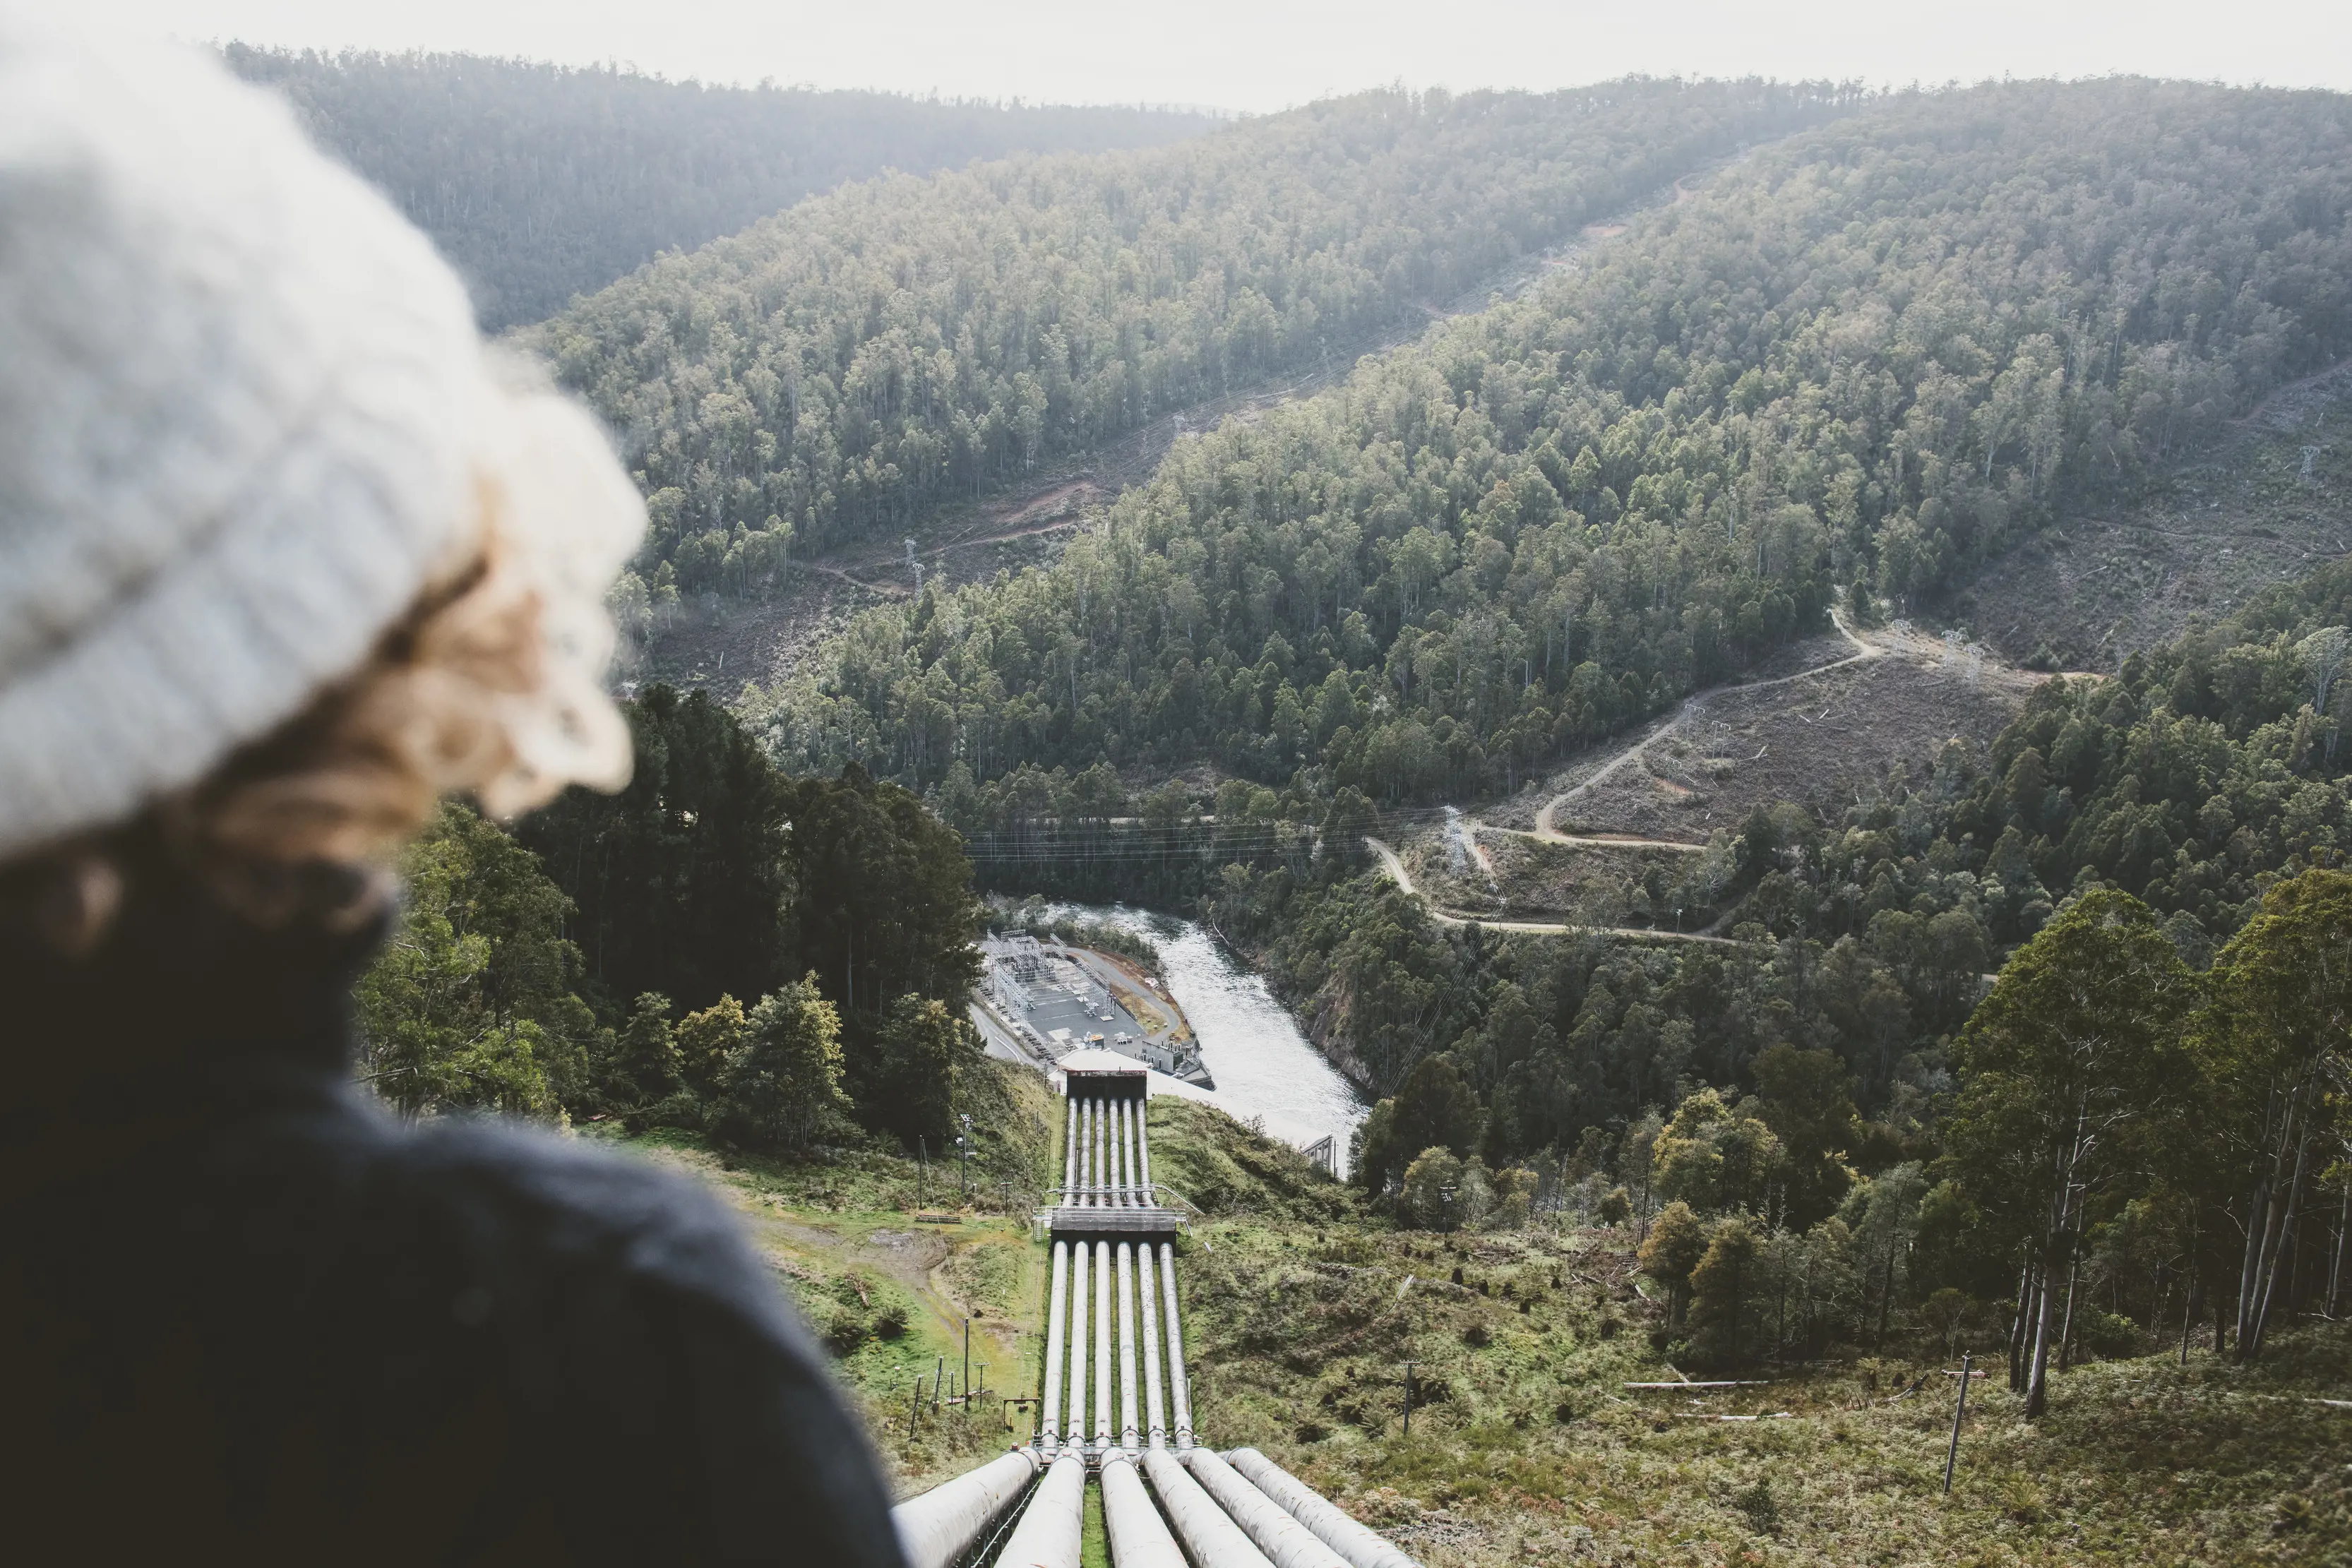 Image of a person in the foreground overlooking the penstocks feeding the Tarraleah Power Station, a hydroelectric power station located in the Central Highlands.